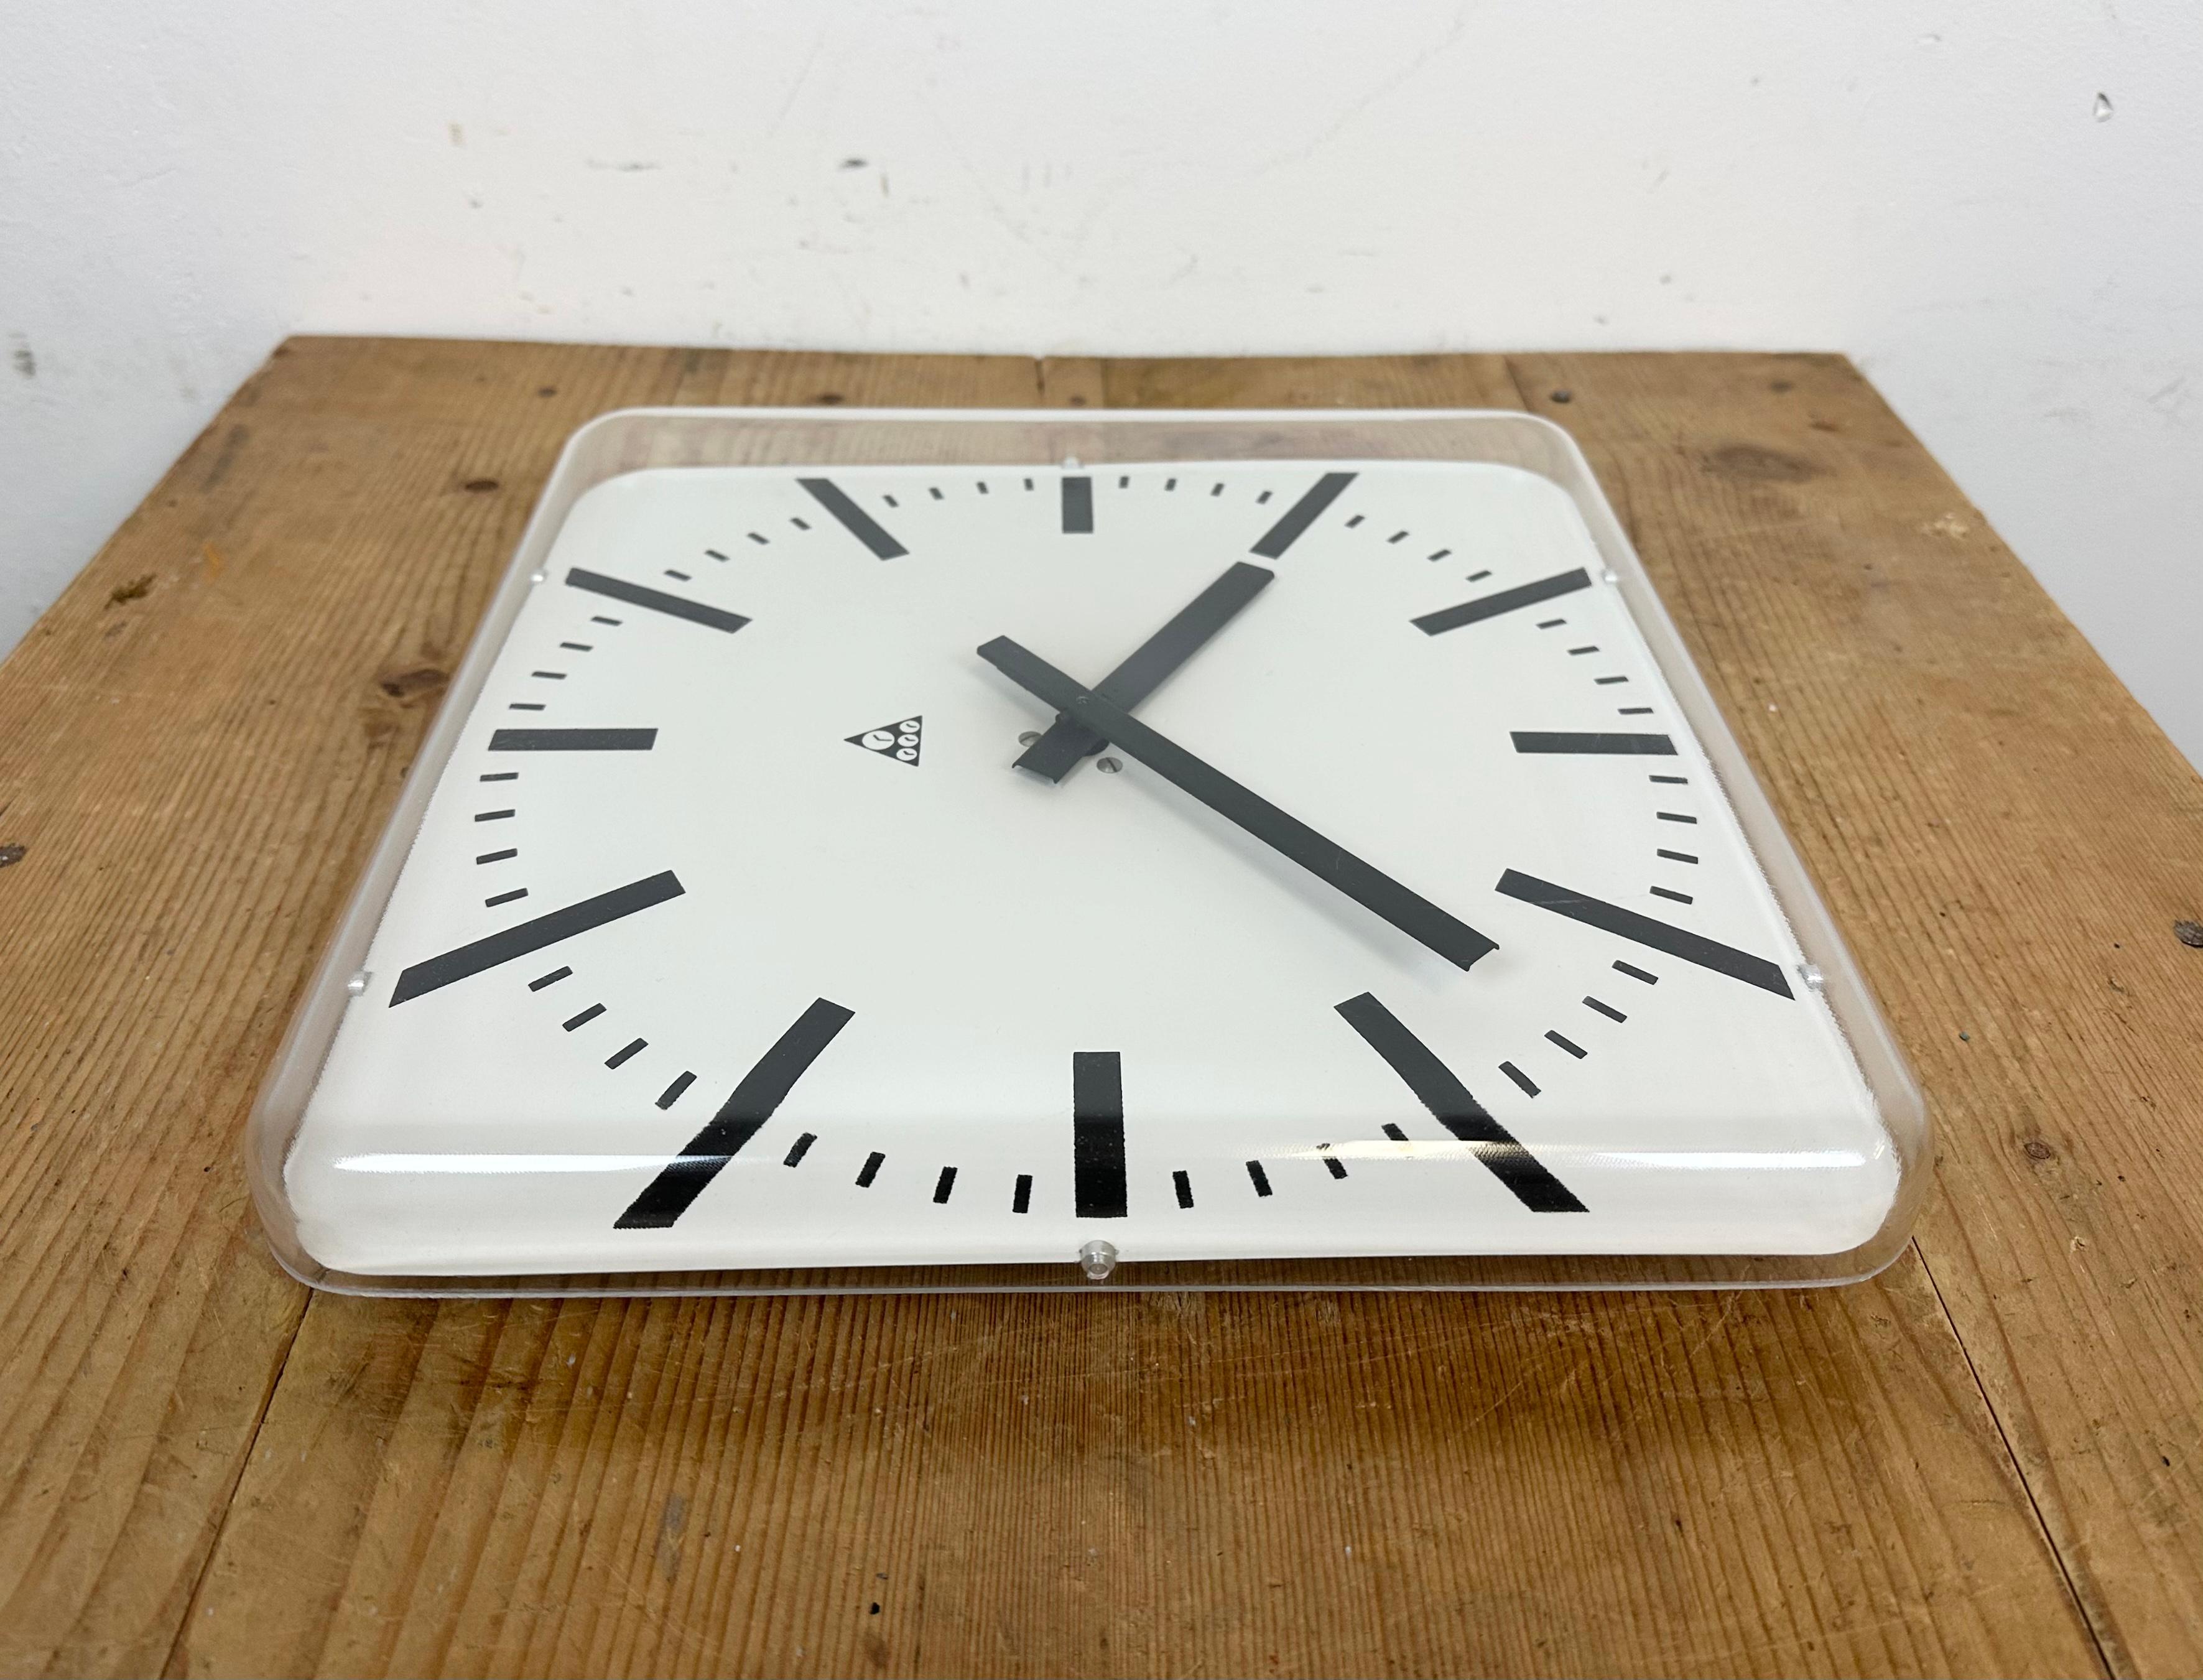 Aluminum Vintage Square Office Wall Clock from Pragotron, 1980s